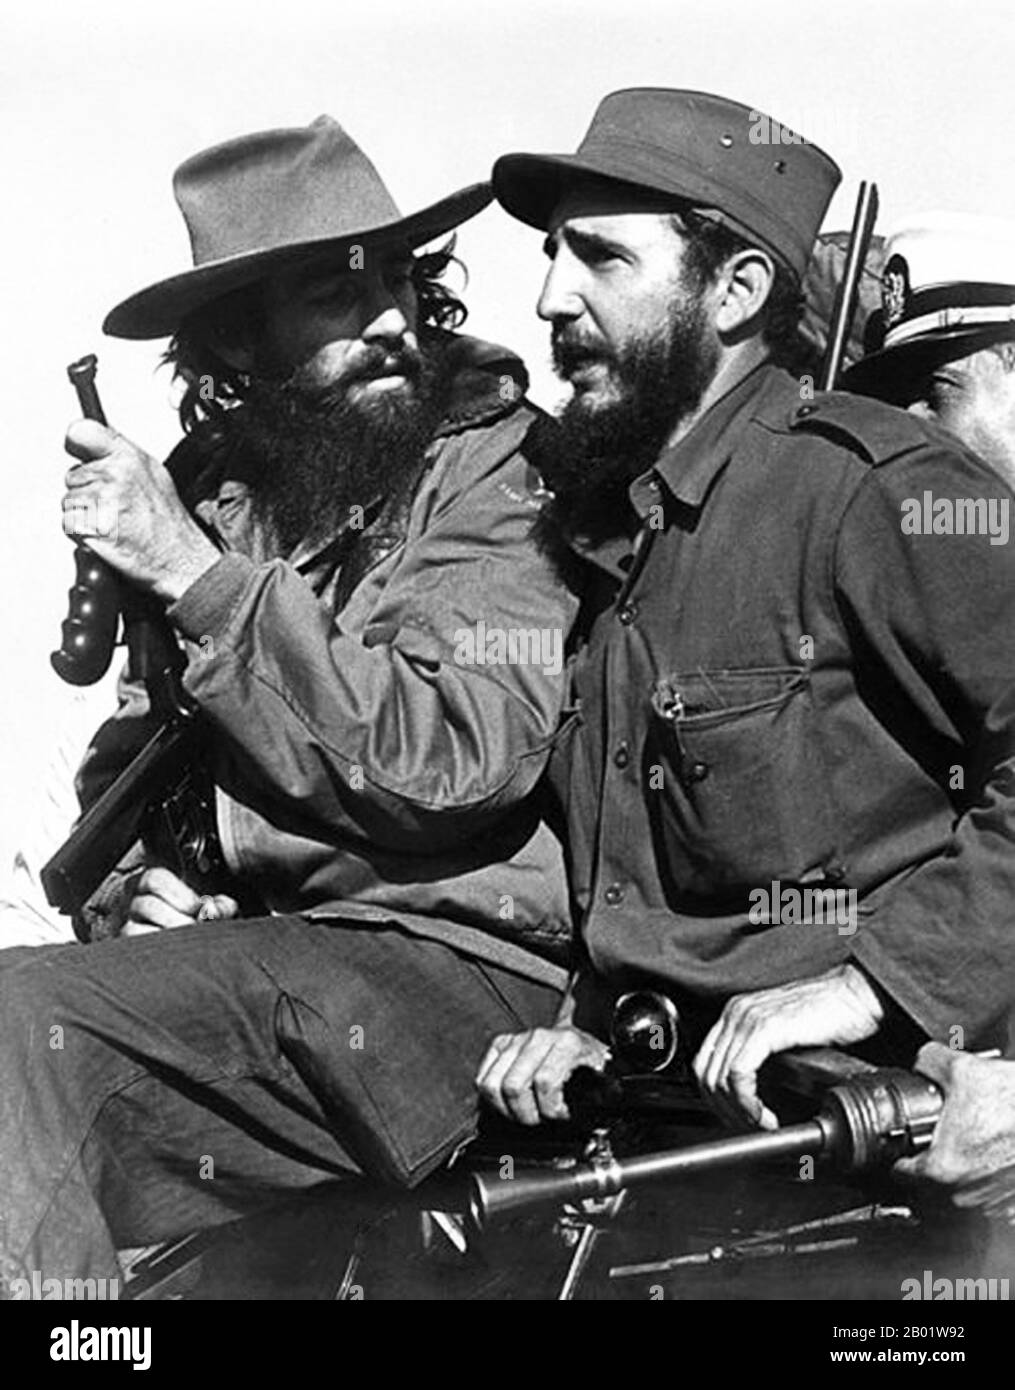 Cuba: Camilo Cienfuegos (left) talks with Fidel Castro (right), Havana, 1959.  Fidel Alejandro Castro Ruz (13 August 1926 - 25 November 2016) was a Cuban political leader and communist revolutionary. As the primary leader of the Cuban Revolution, Castro served as the Prime Minister of Cuba from February 1959 to December 1976, and then as the President of the Council of State of Cuba and the President of Council of Ministers of Cuba until his resignation from the office in February 2008. He served as First Secretary of the Communist Party of Cuba from the party's foundation in 1961. Stock Photo